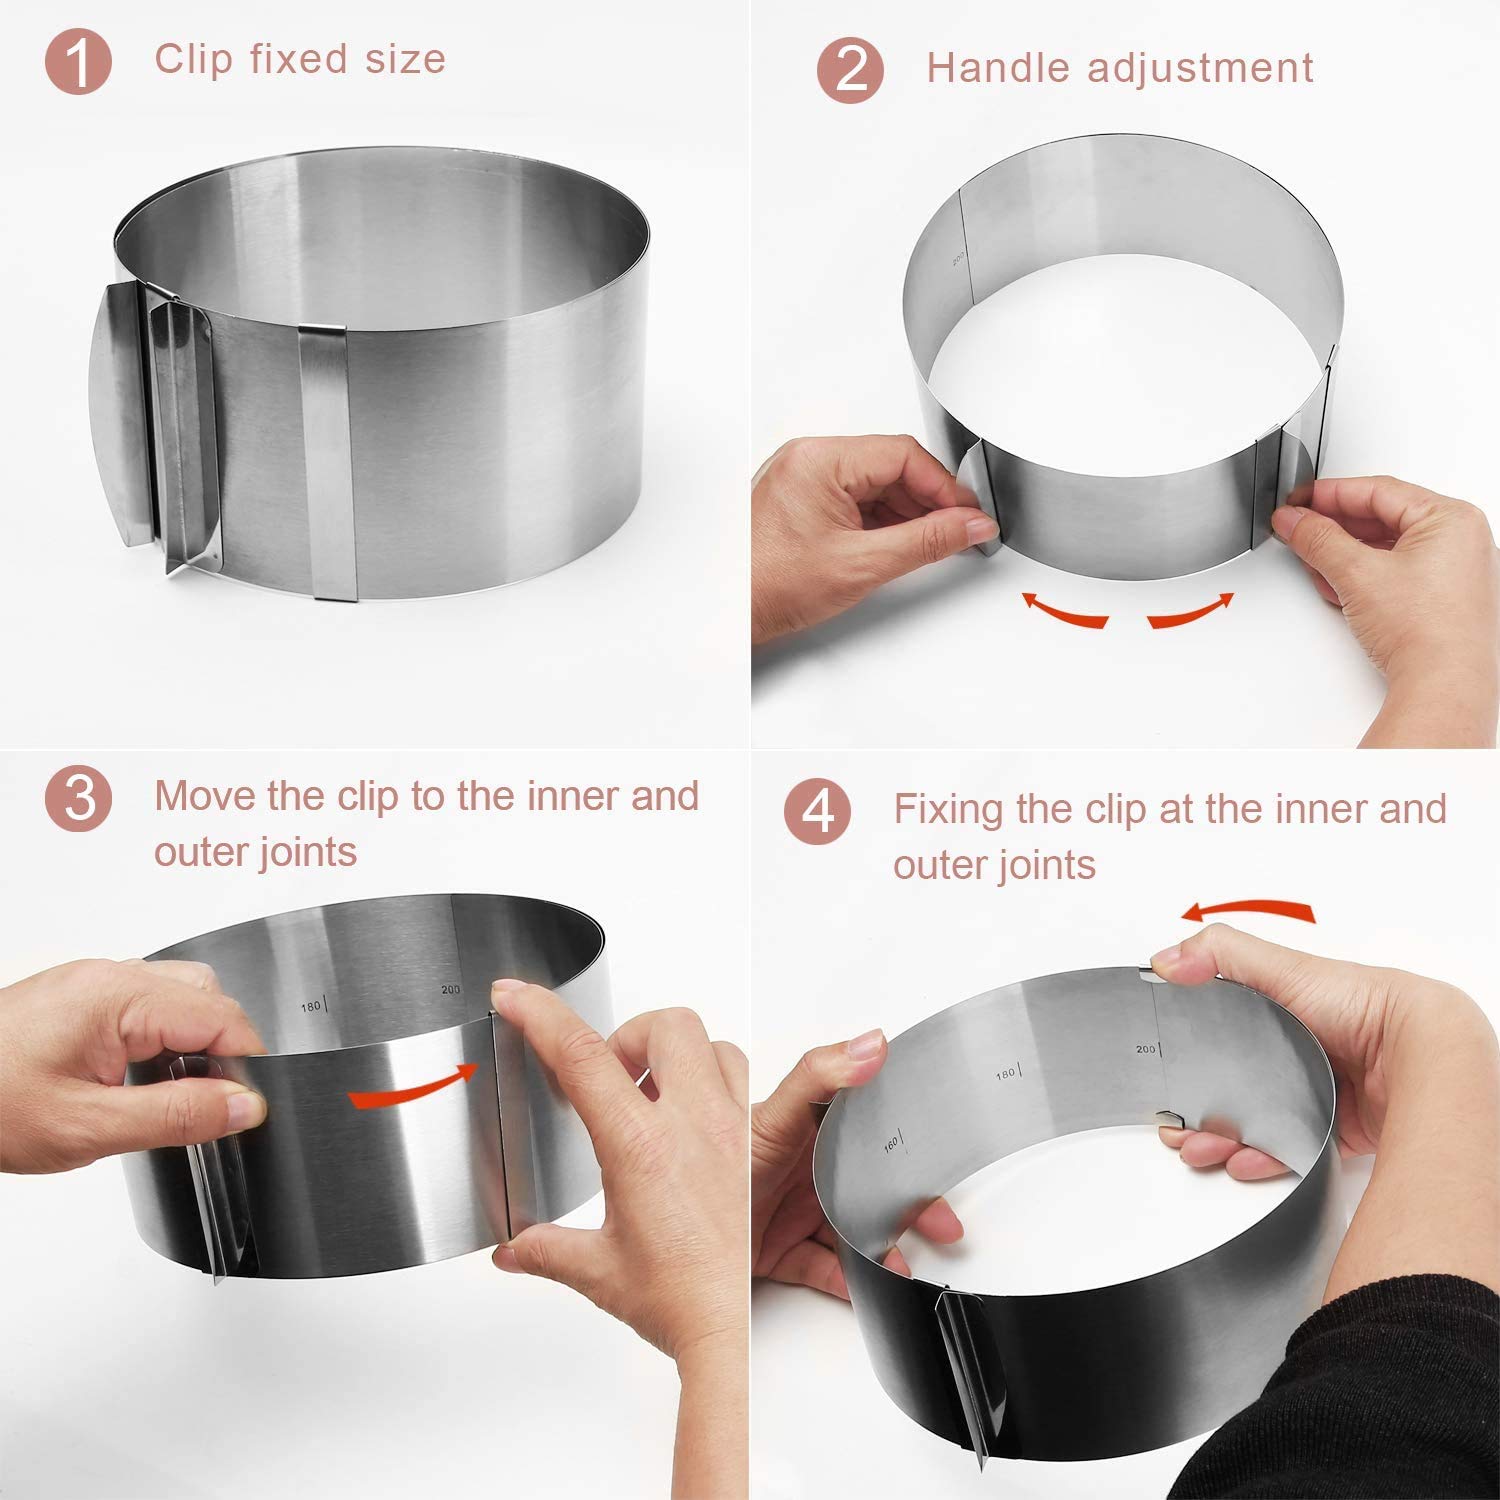 Adjustable Stainless Steel Cake Mold Ring 6-12" Cake Pan Mold For Baking Kitchen Pastry Tools(Round)